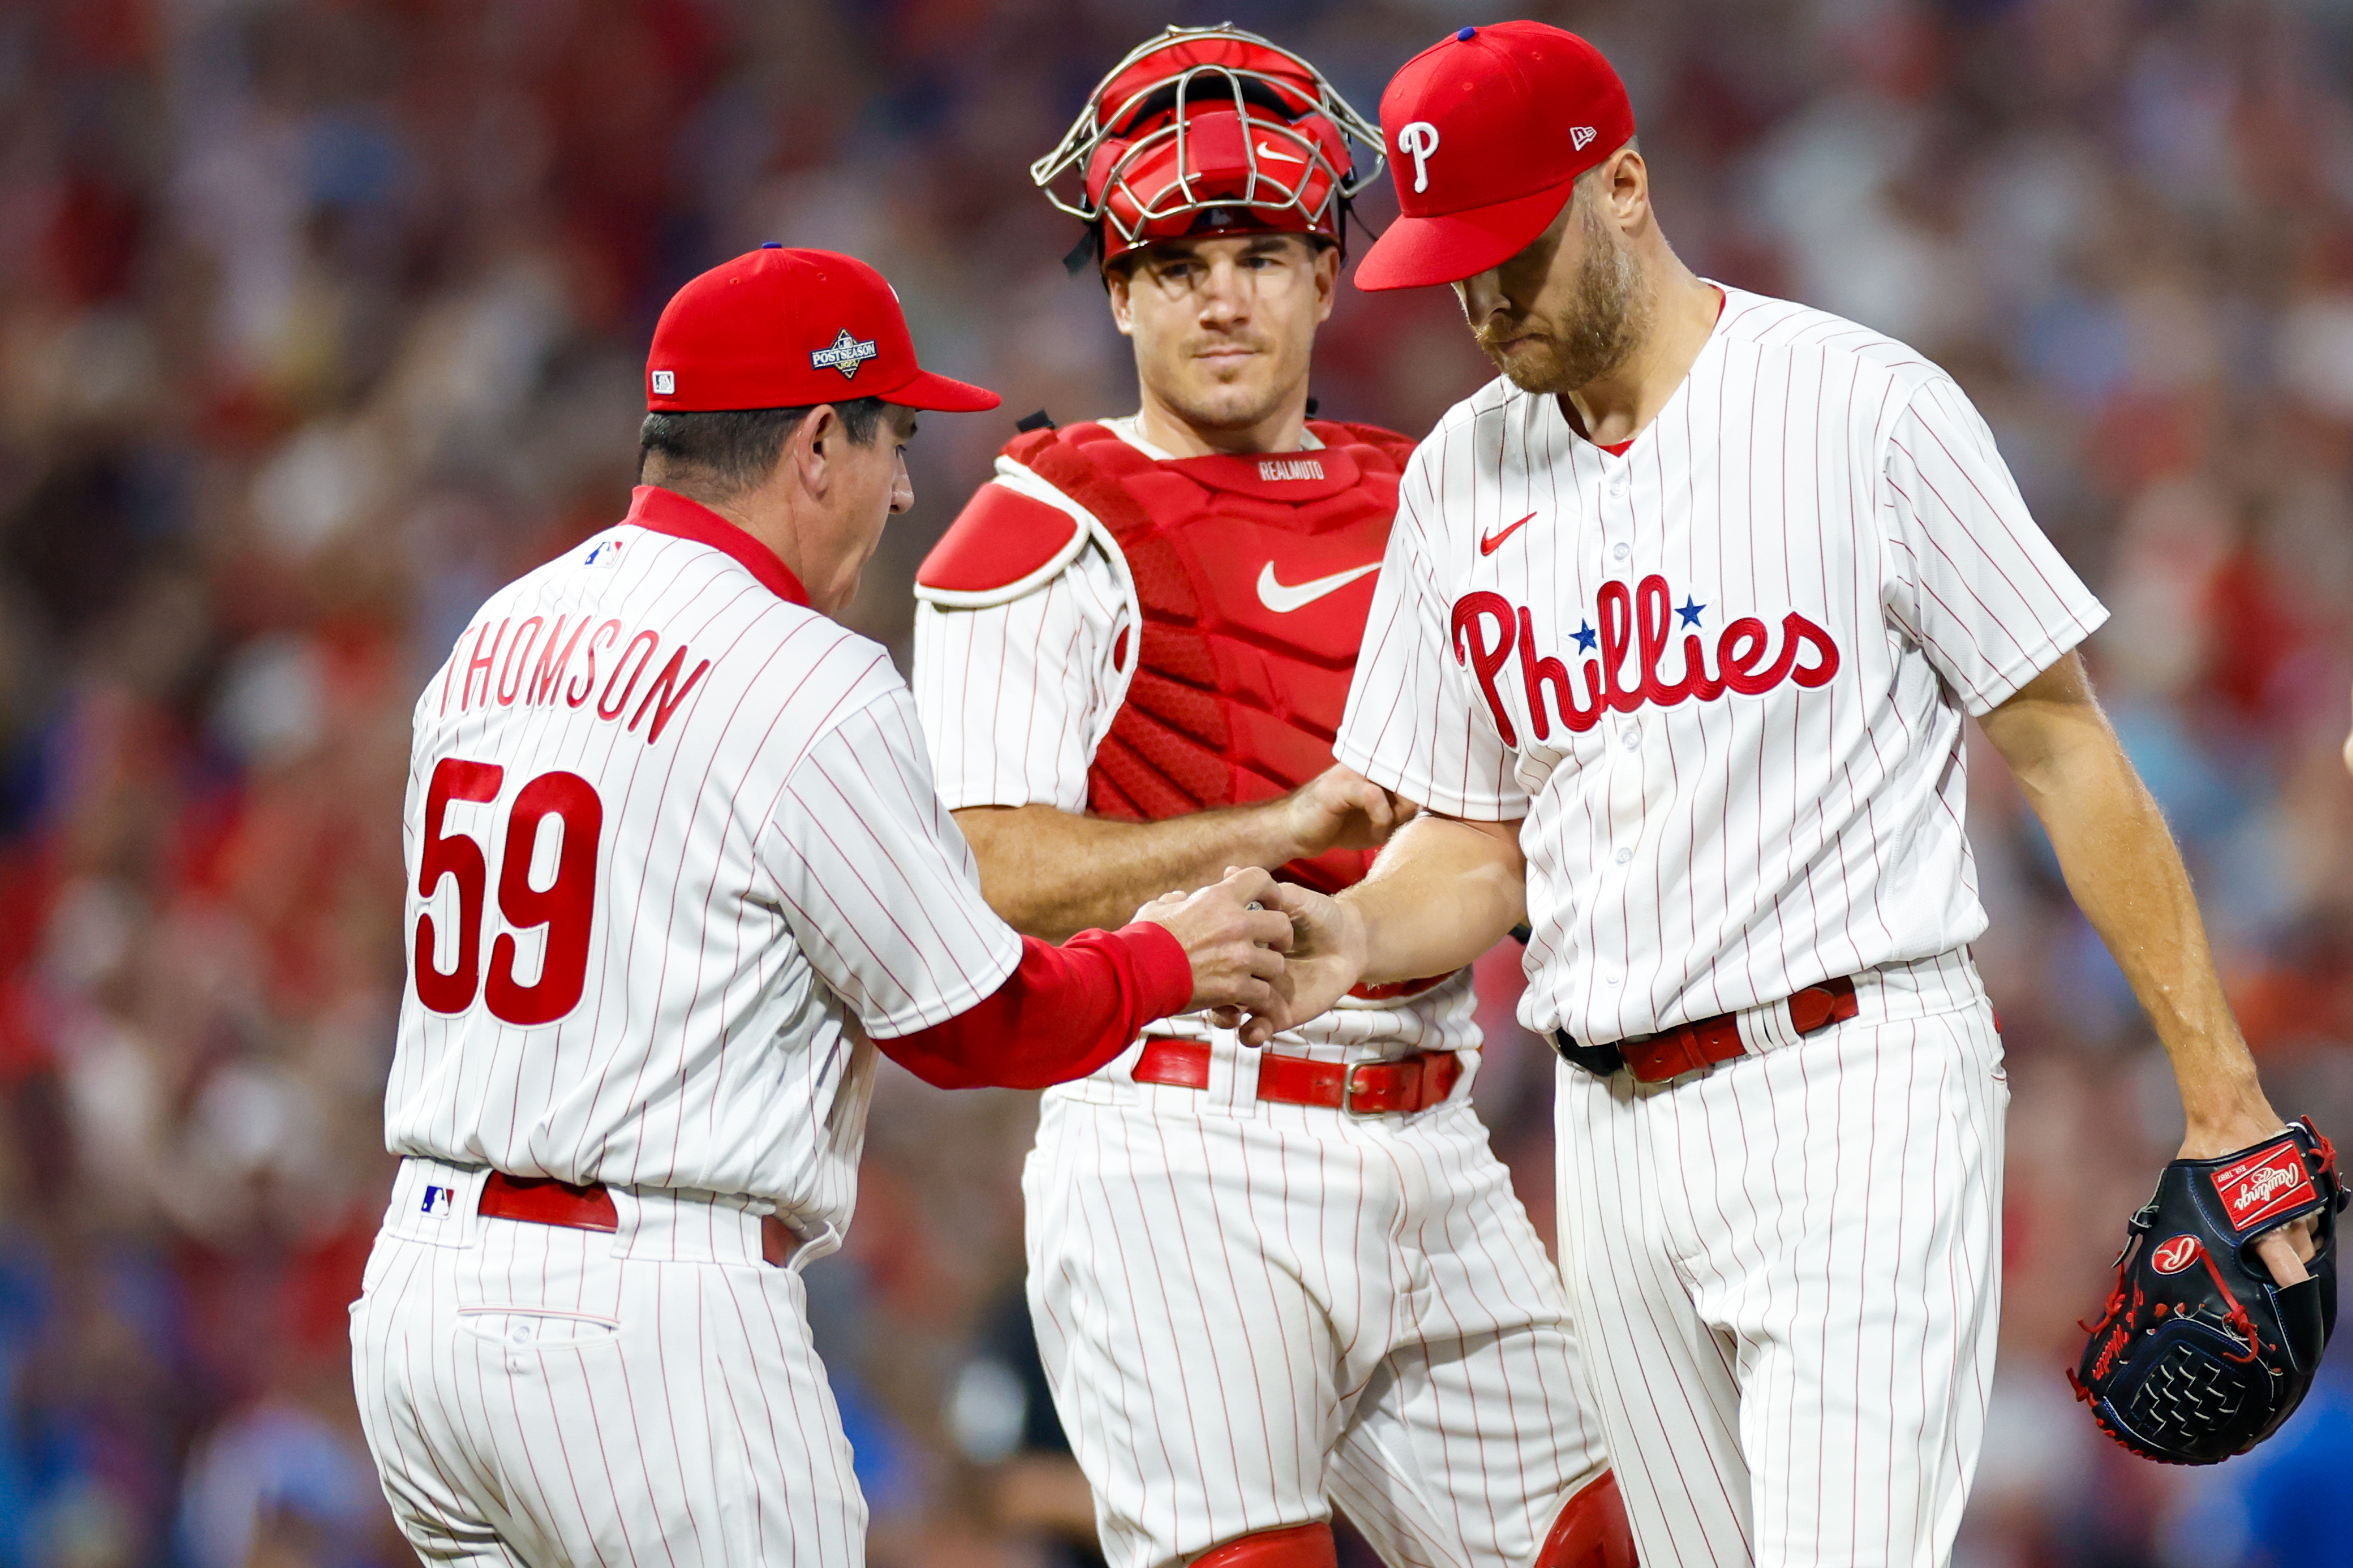 Phillies' Utley won't be set for opener